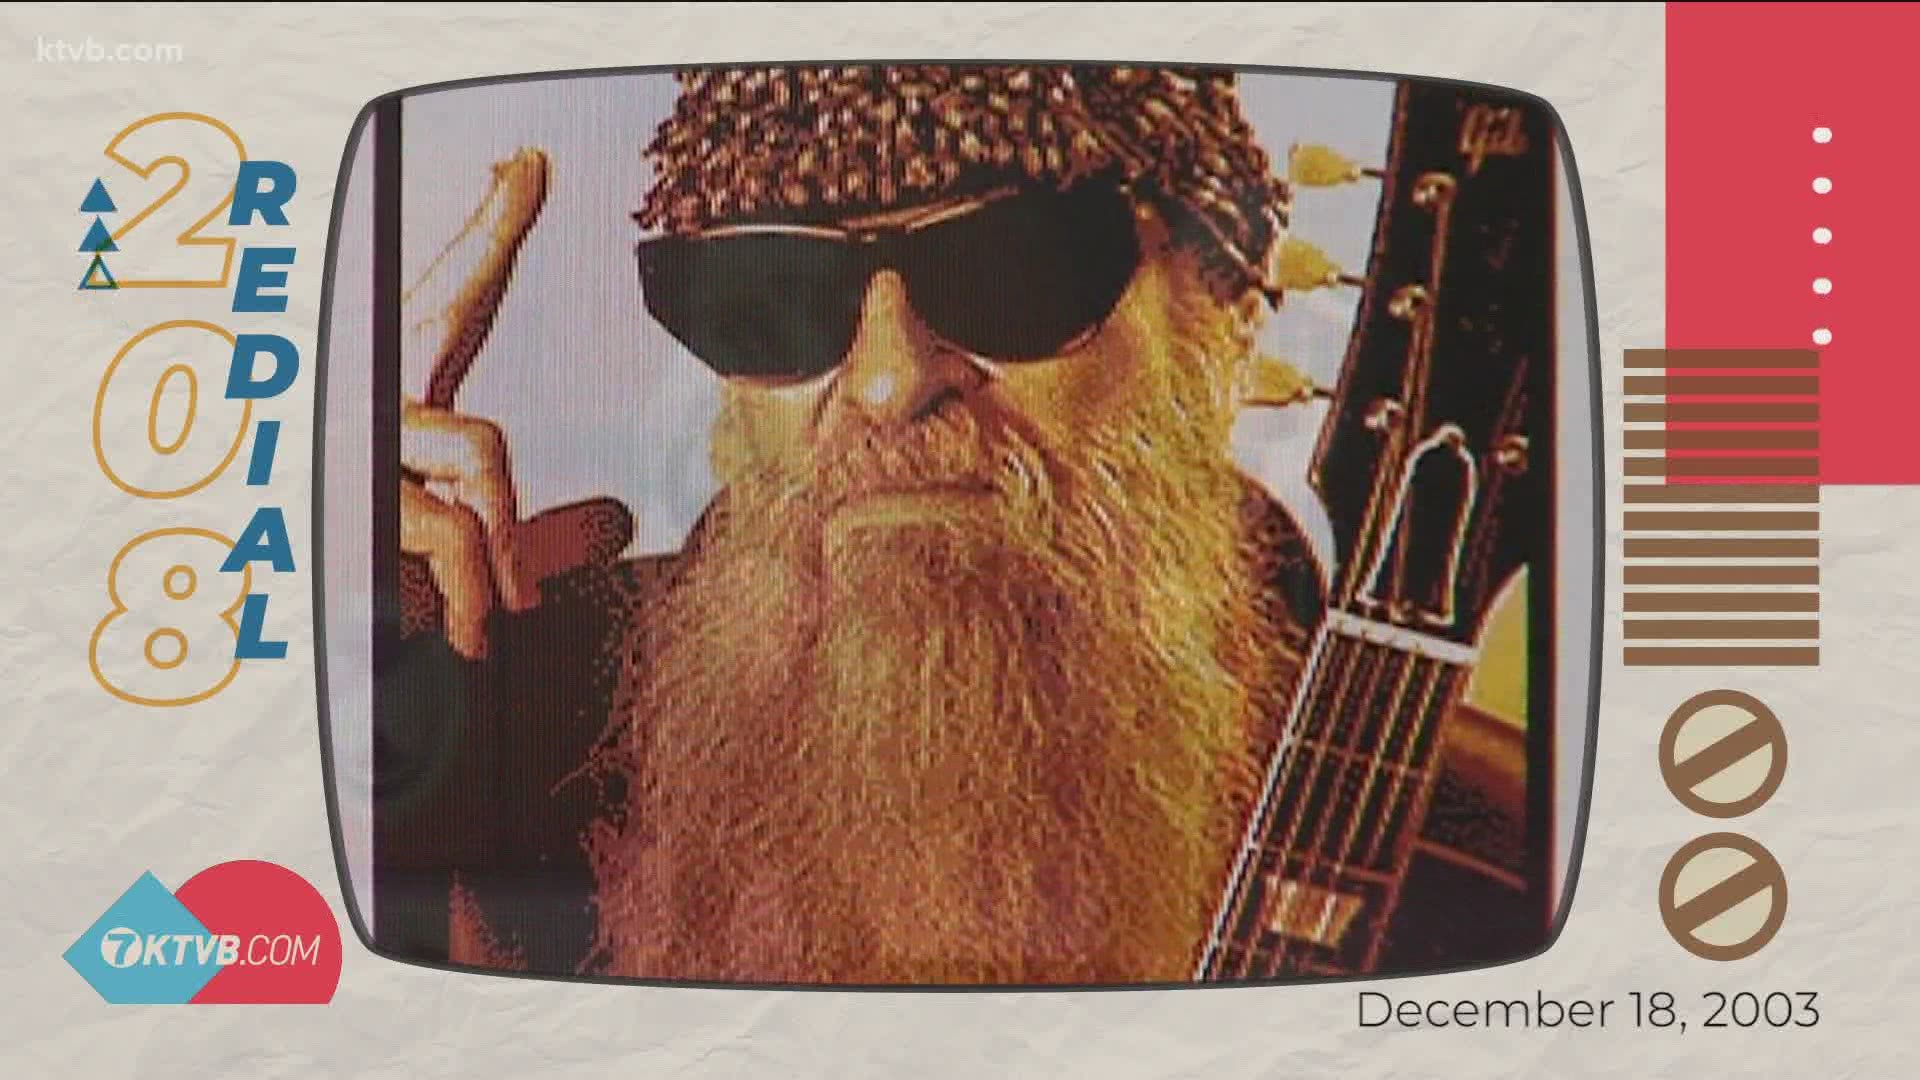 In January of 1984, legendary rock 'n roll band ZZ Top made a stop at the BSU Pavilion, and John Bolin's custom guitar struck a cord with the band's lead guitarist.